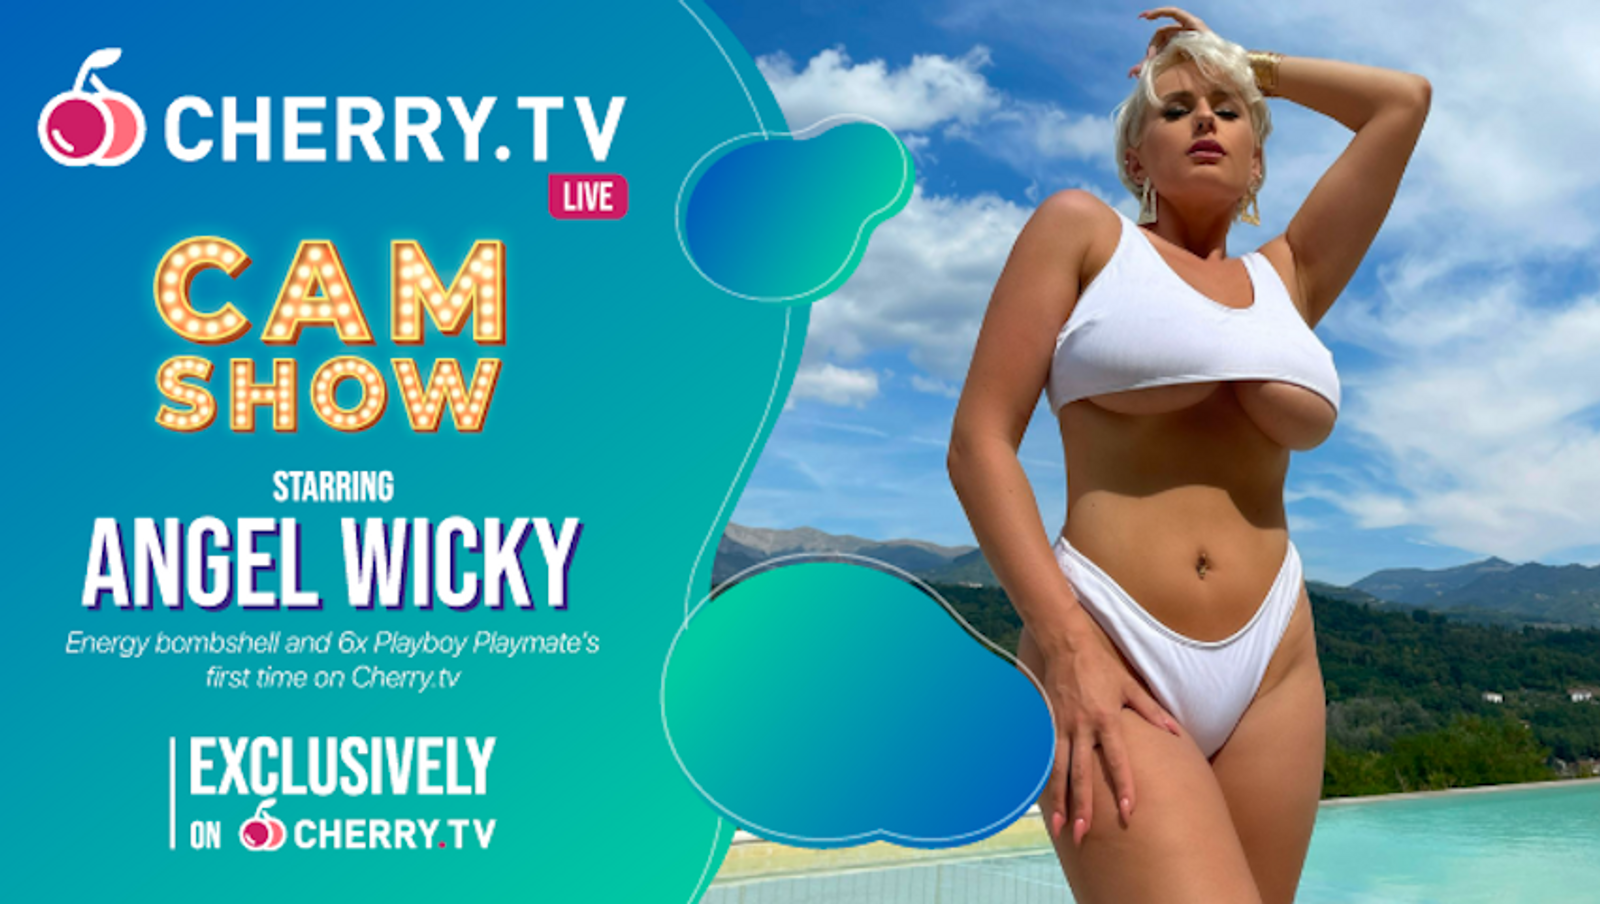 Angel Wicky to Perform Live on Cherry.tv